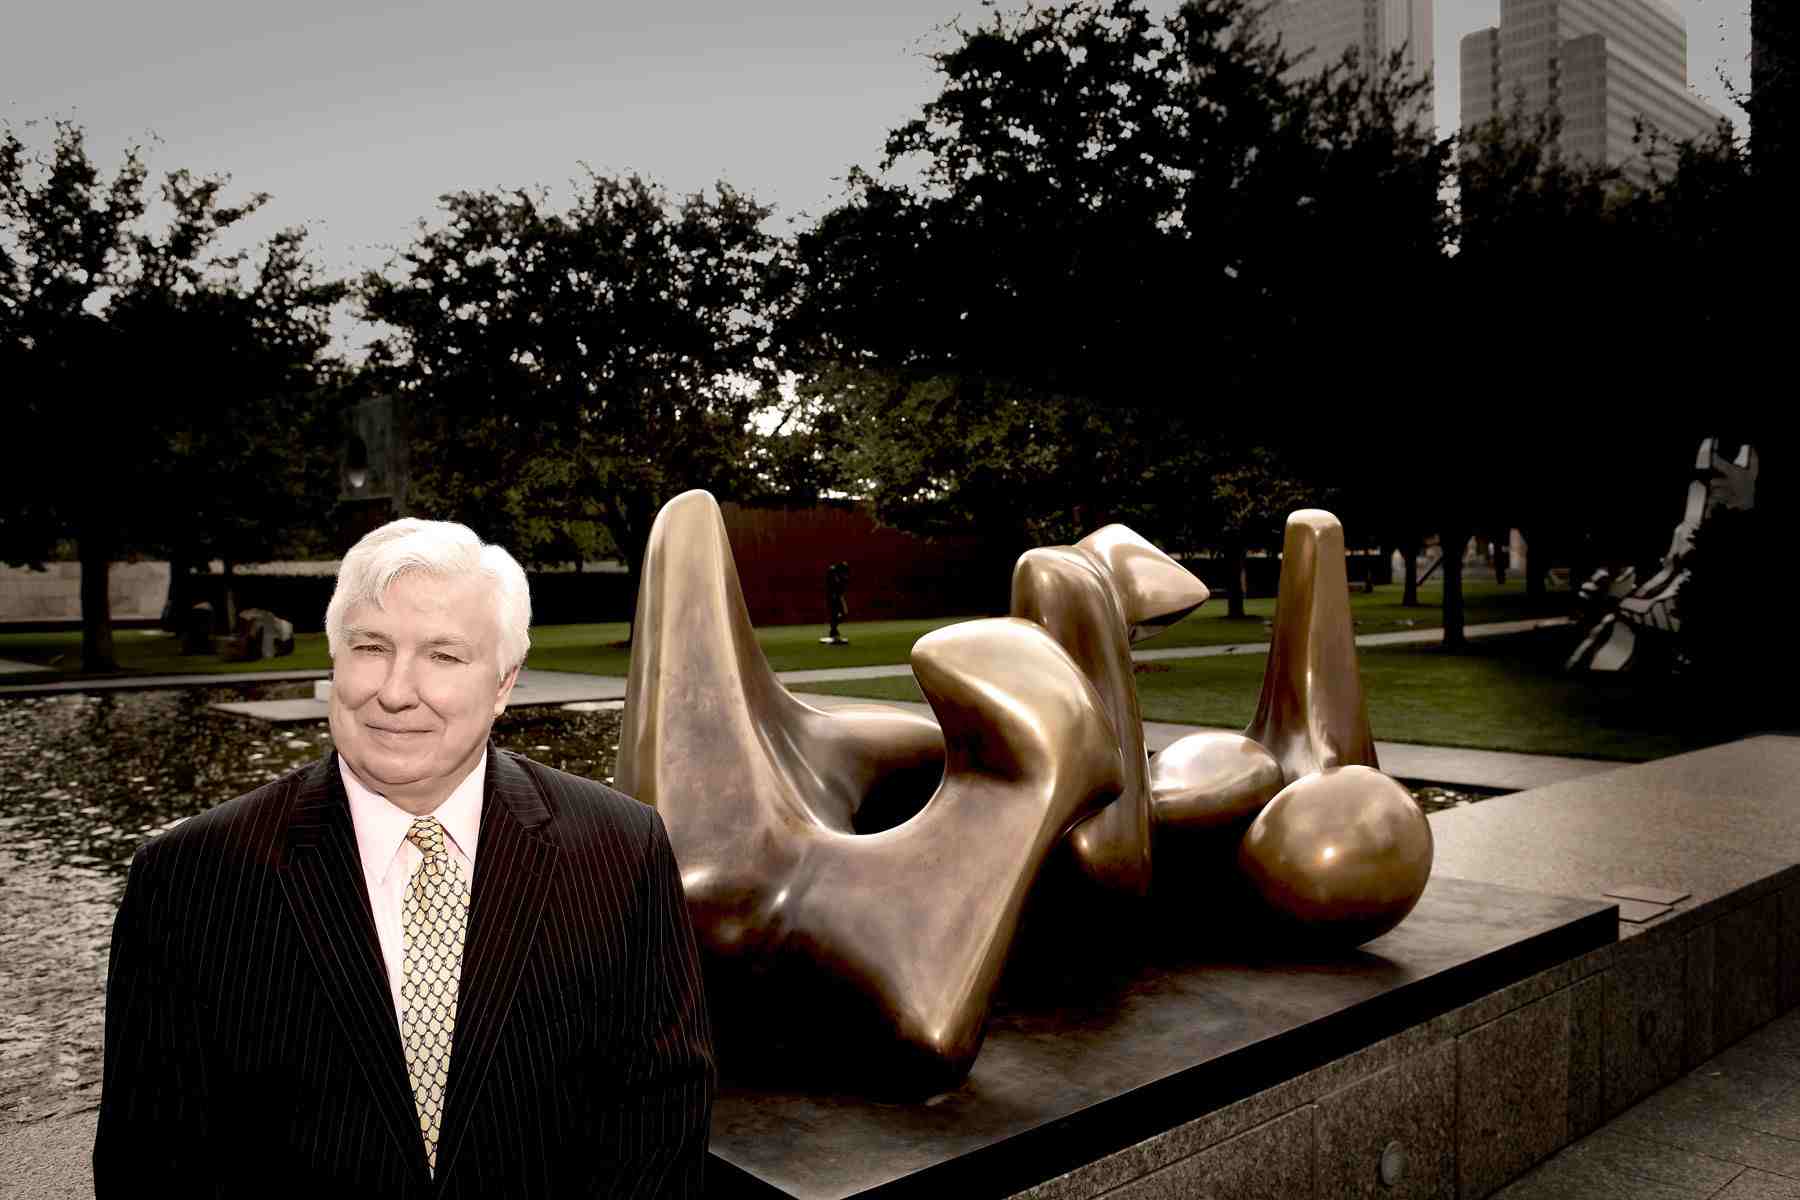 Timeless Elegance: Powerful Executive Portrait Shot at the Nasher Sculpture Center